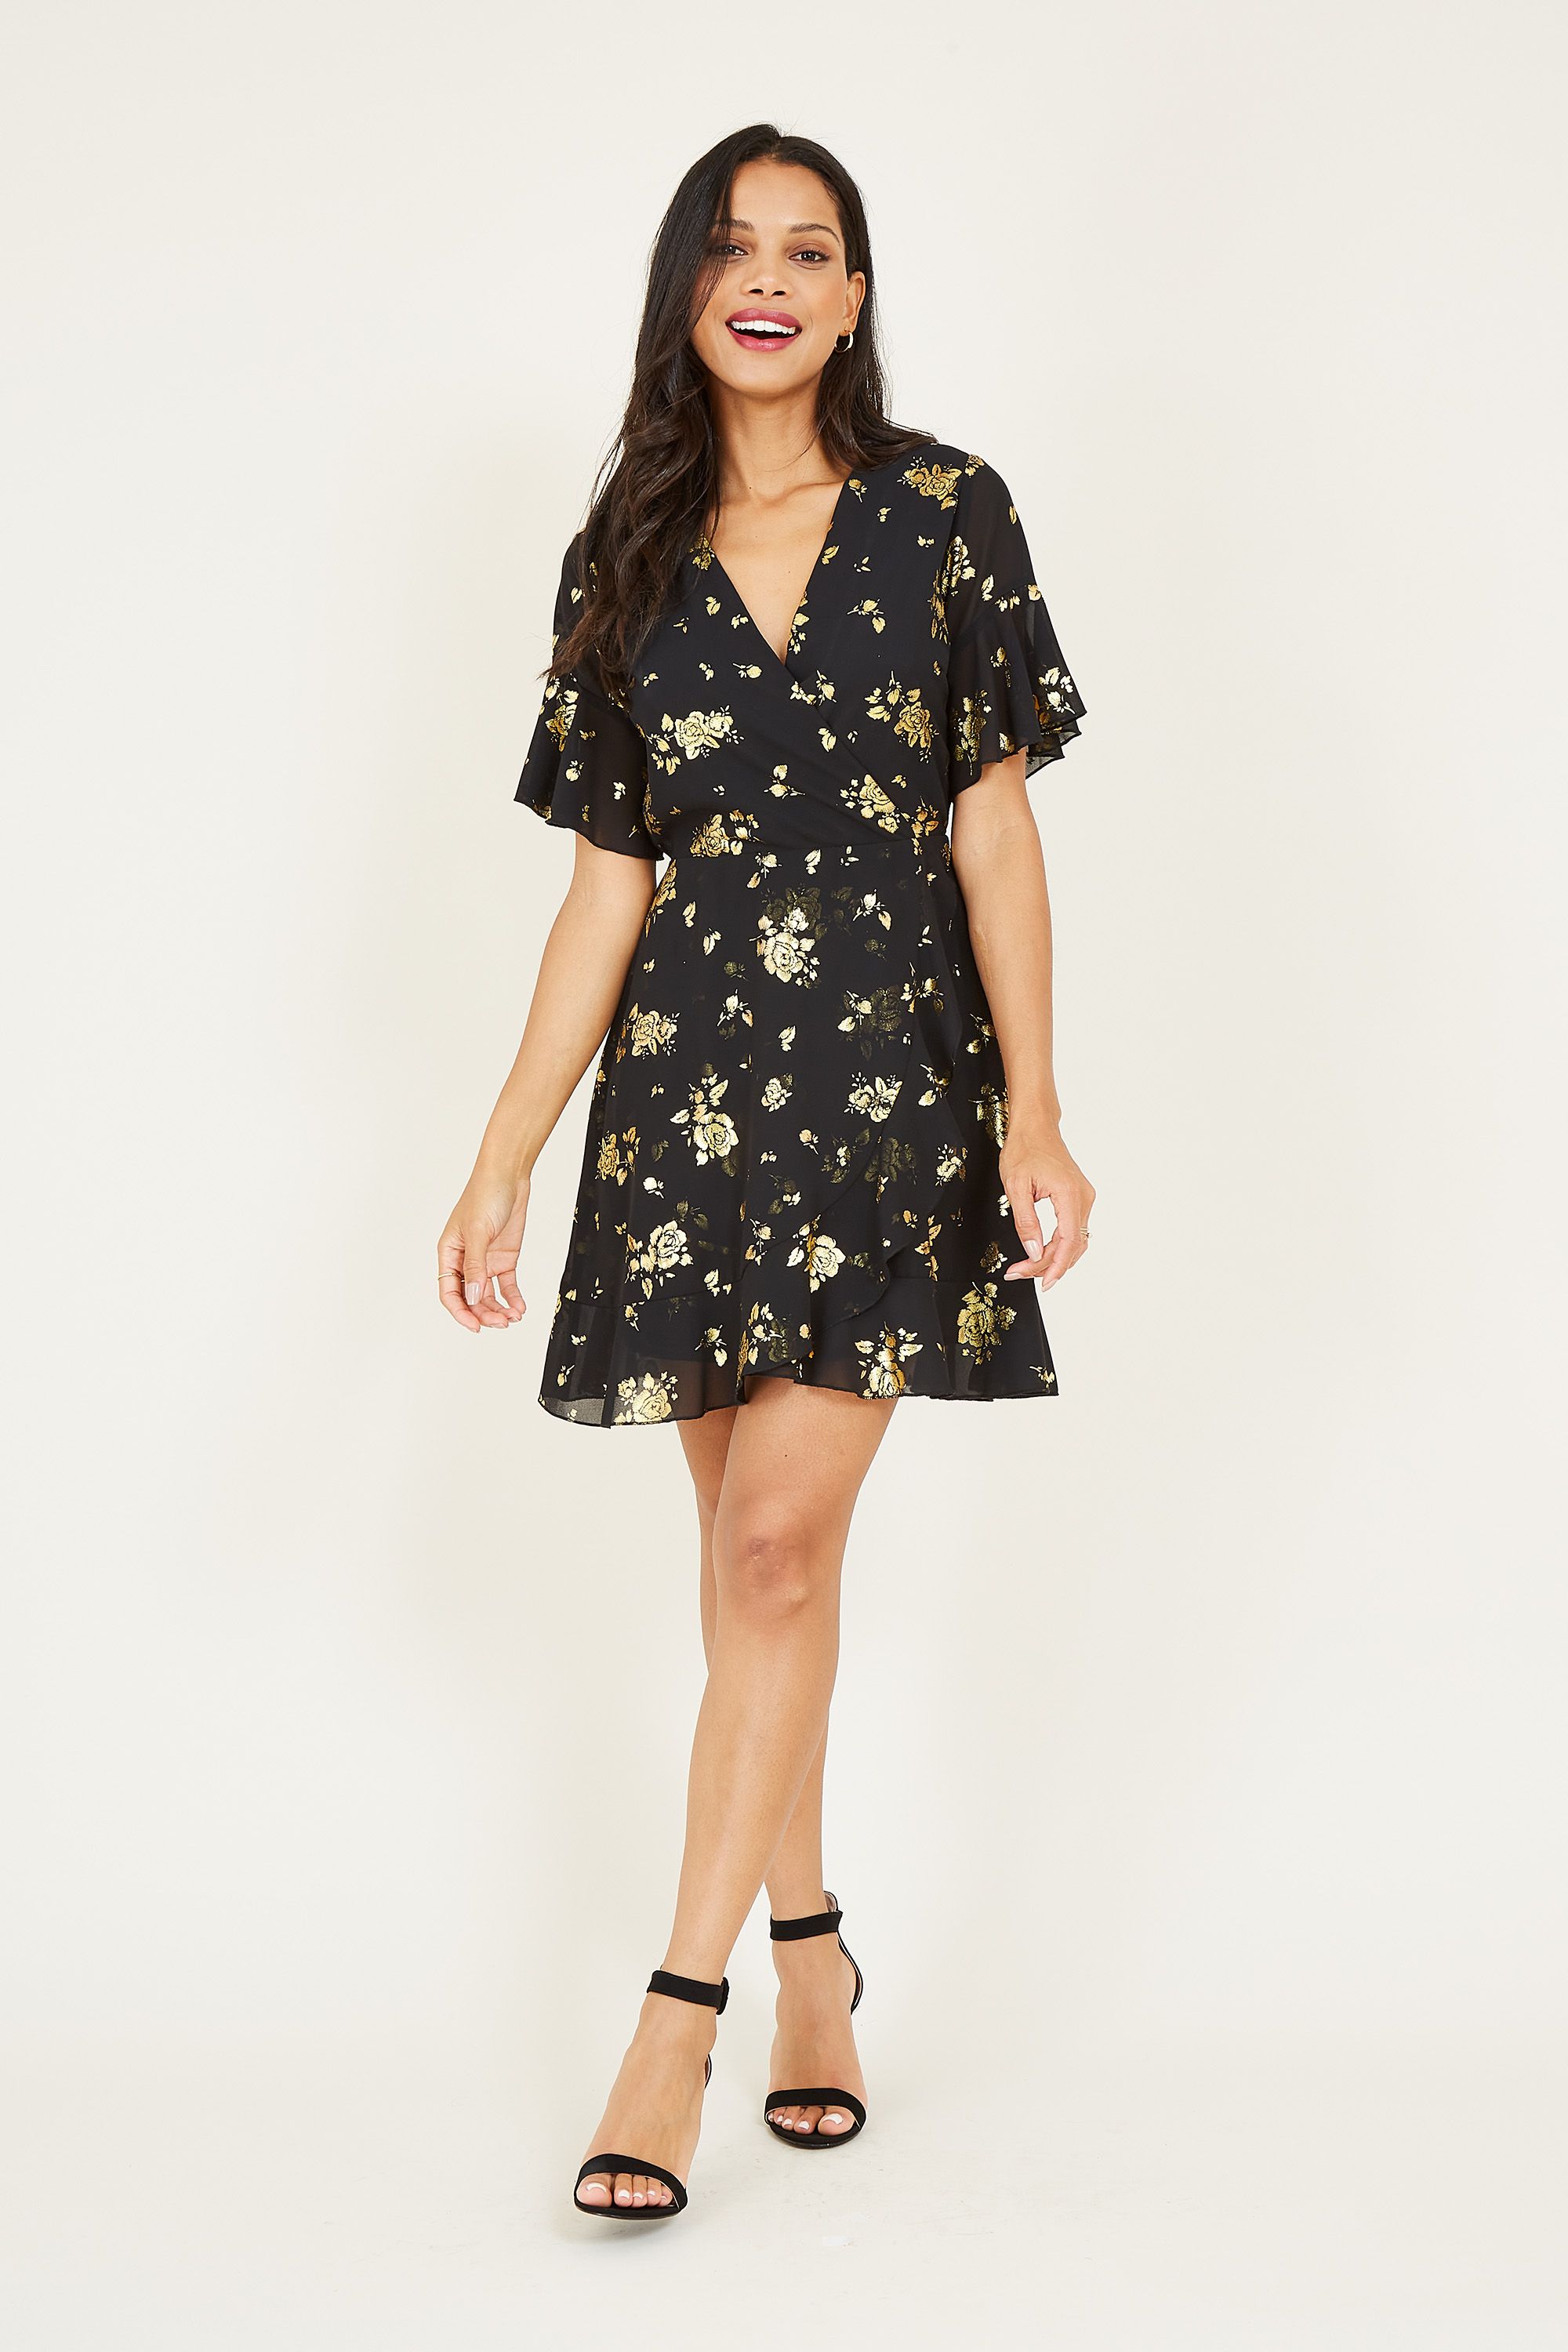 Printed with pretty foil florals running from the shoulder to the hemline, this Mela Foil Floral Skater Dress is a wardrobe hit. Featuring lightweight fabric that ties at the waist, it's styled with short floaty sleeves and gentle ruffles. A lining runs undernetah to aid movement, accessorize with anything from trainers to heels.